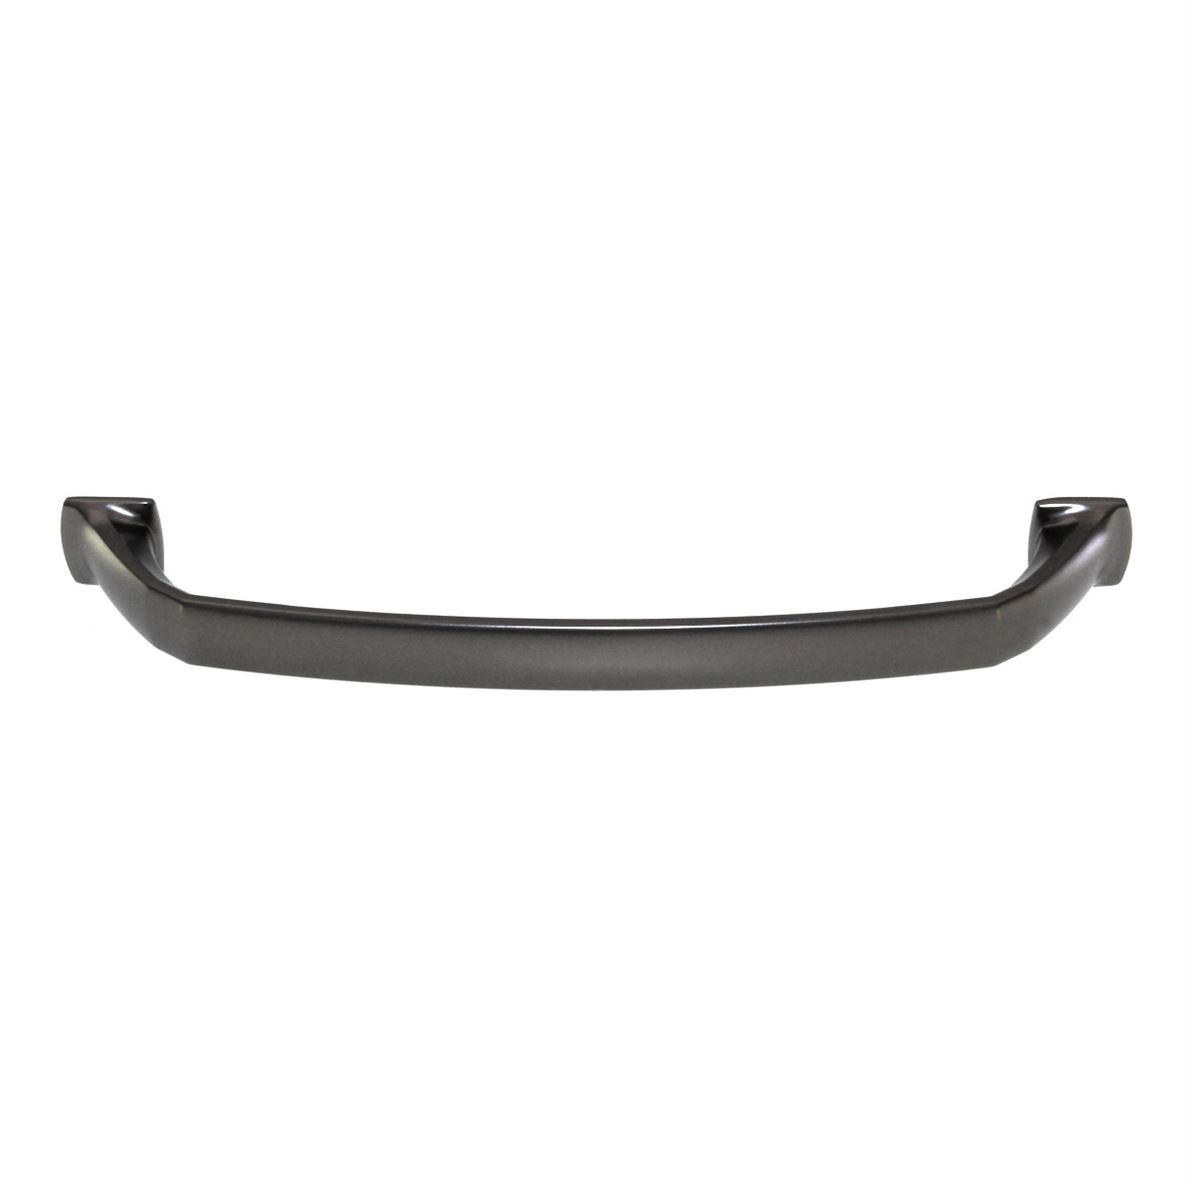 Pride Madison Cabinet Arch Pull 6 1/4" (160mm) Ctr Dark Pewter P93160-DP